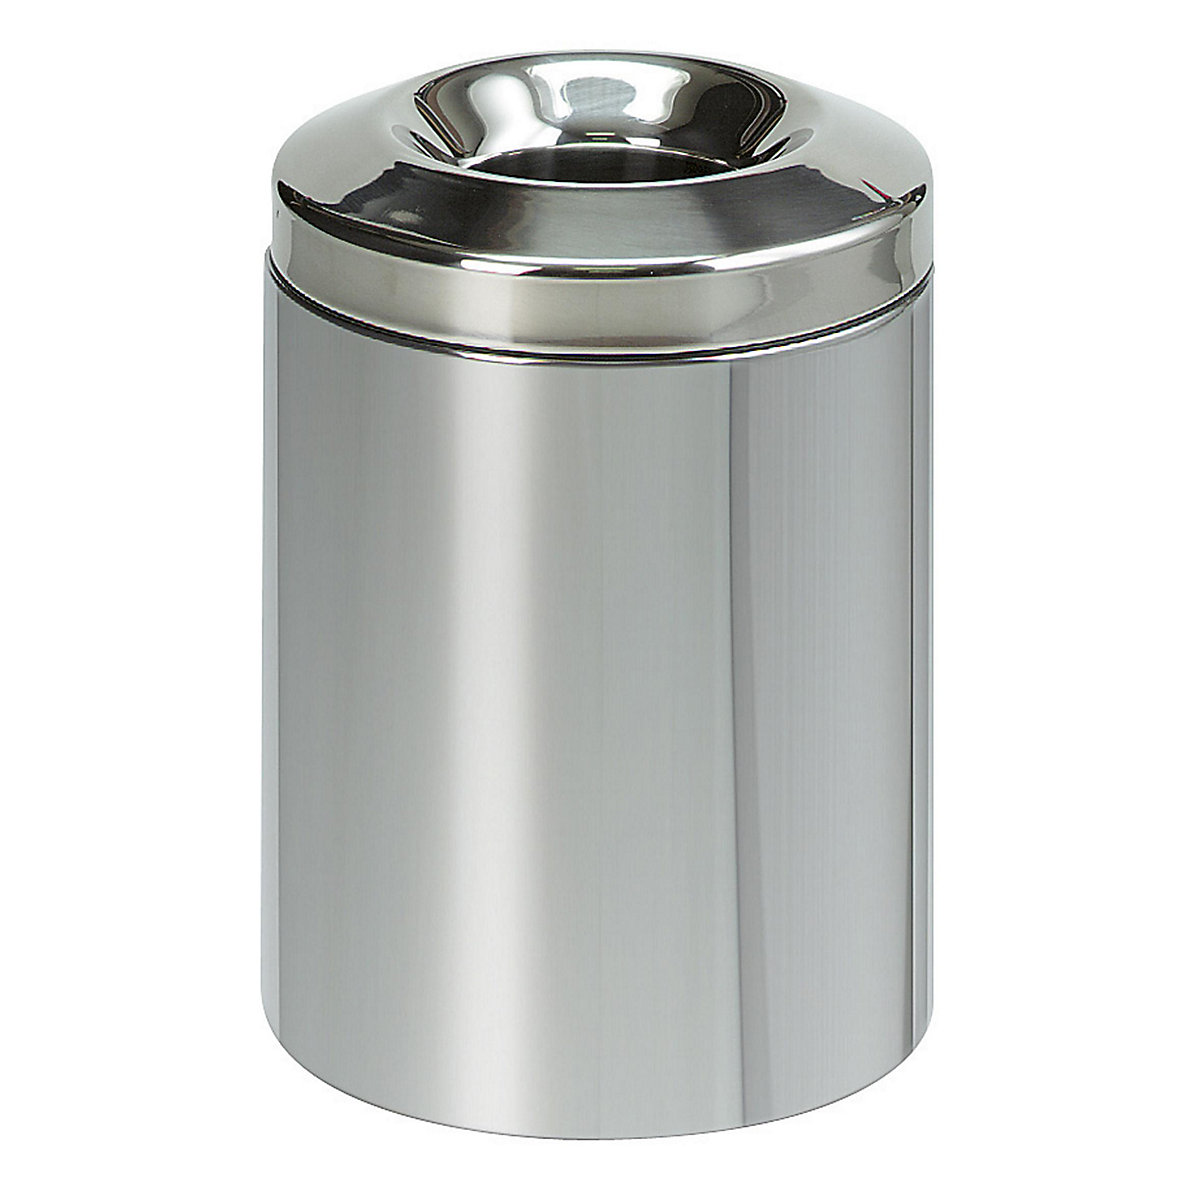 Safety waste paper bin, stainless steel – Brabantia, self-extinguishing, capacity 7 l, HxØ 277 x 207 mm, glossy-4